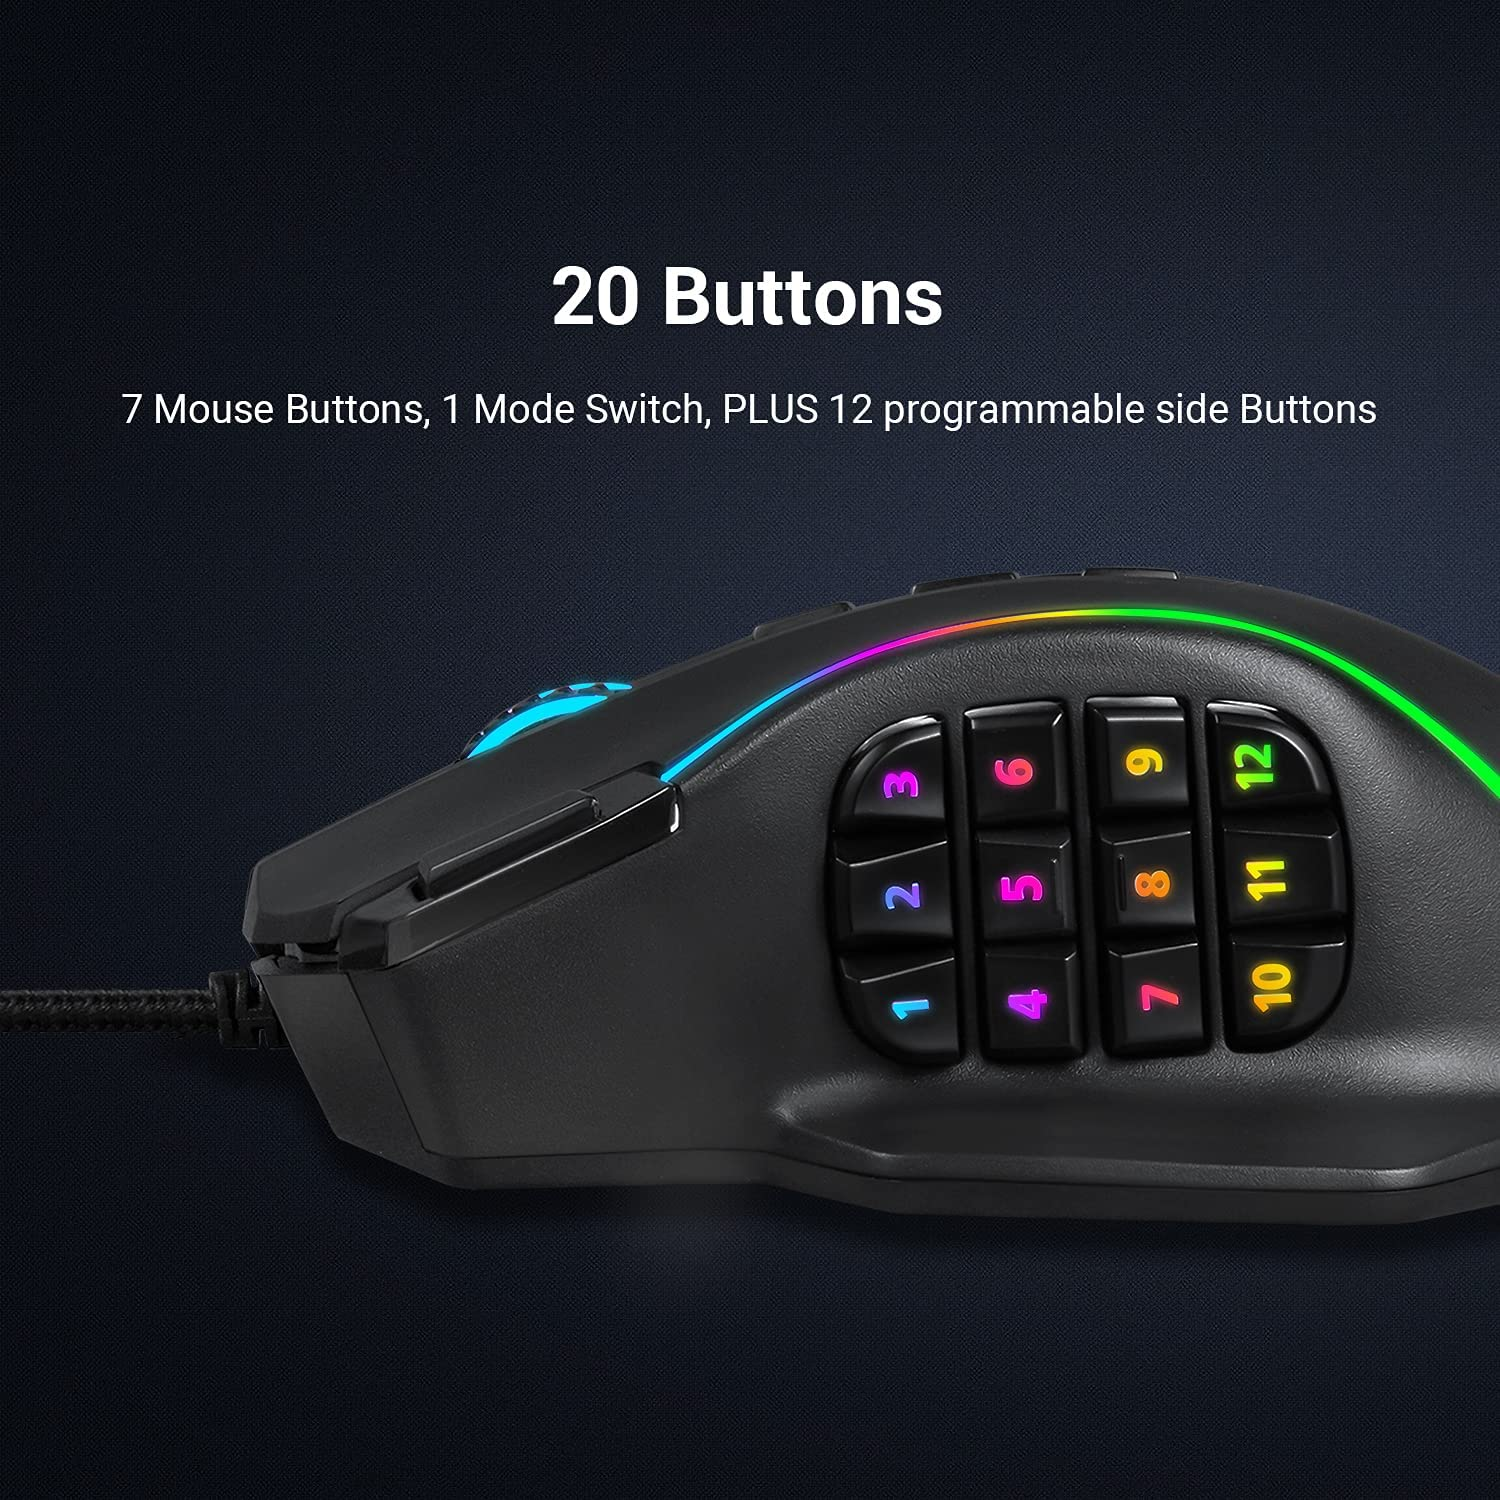 A gaming mouse will have many more buttons than a regular mouse and the more programable buttons it has, the better.